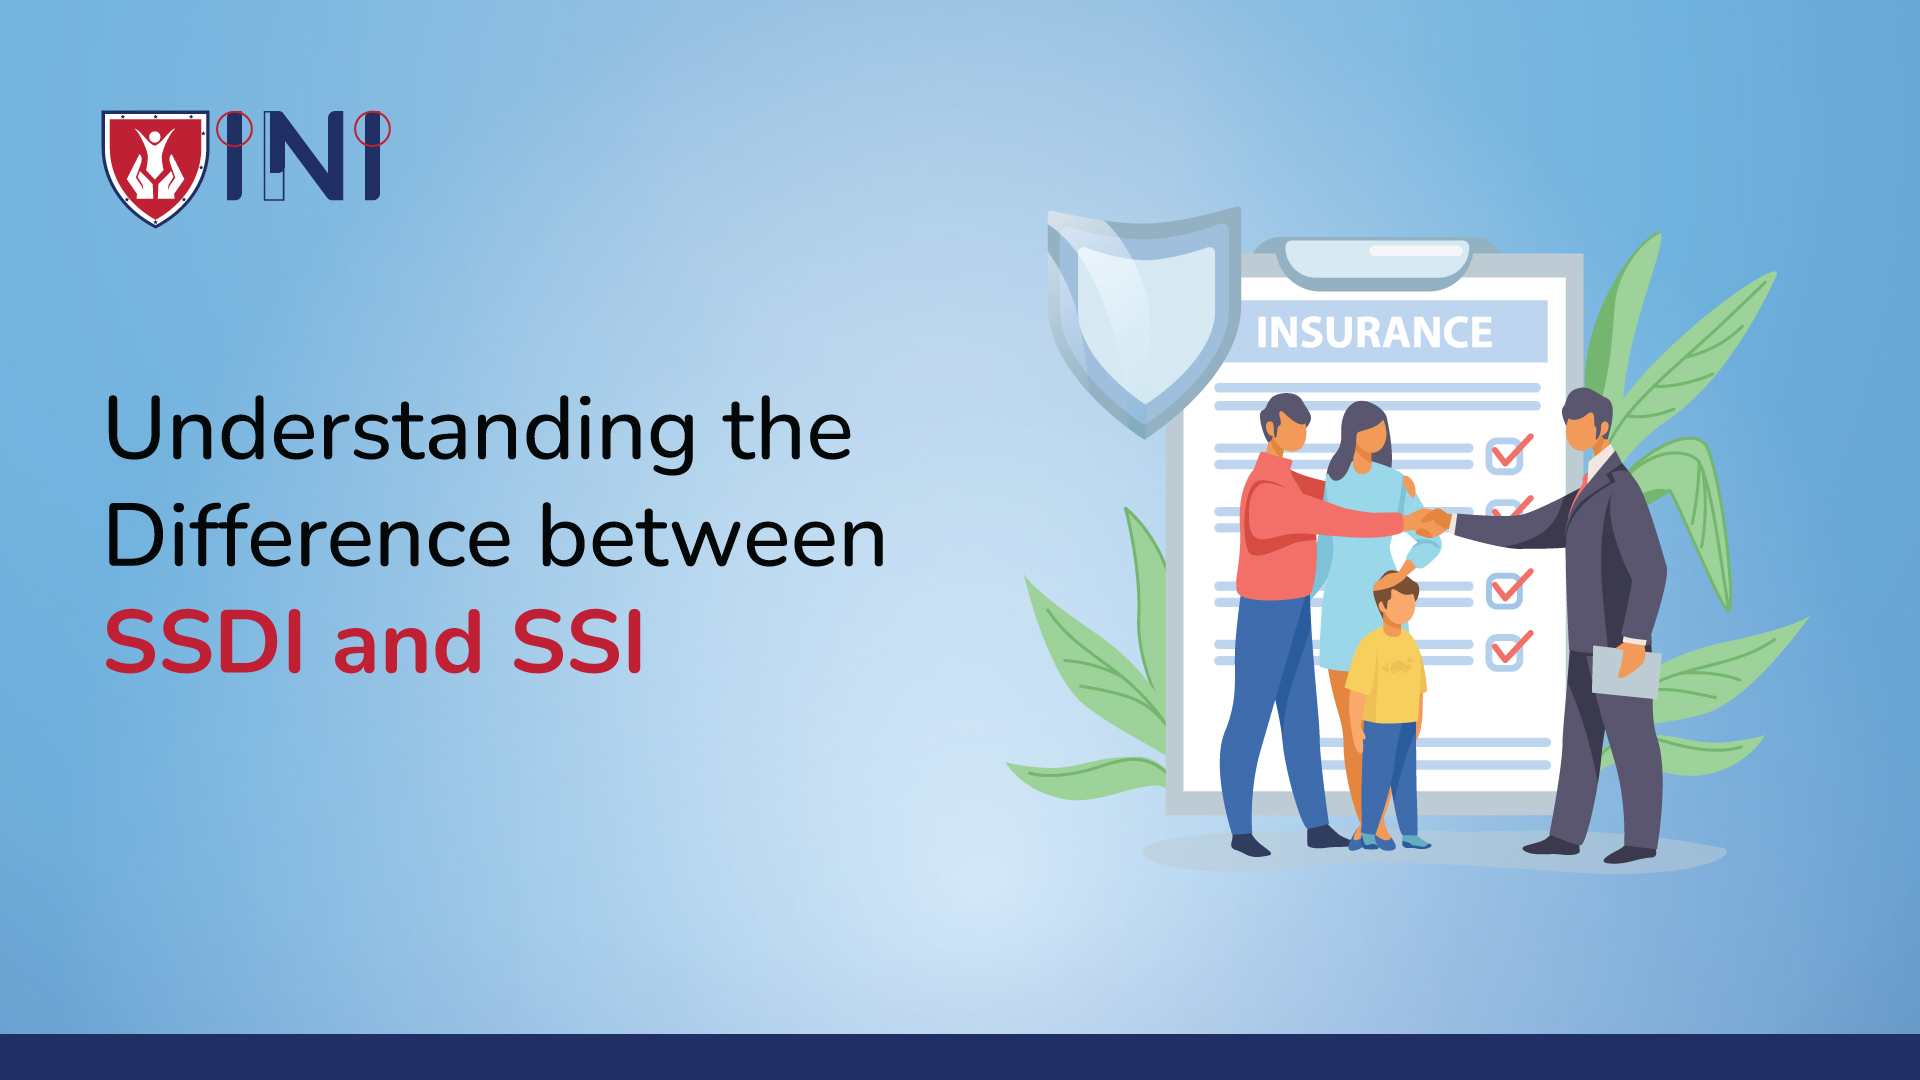 Understanding the difference between SSDI and SSI